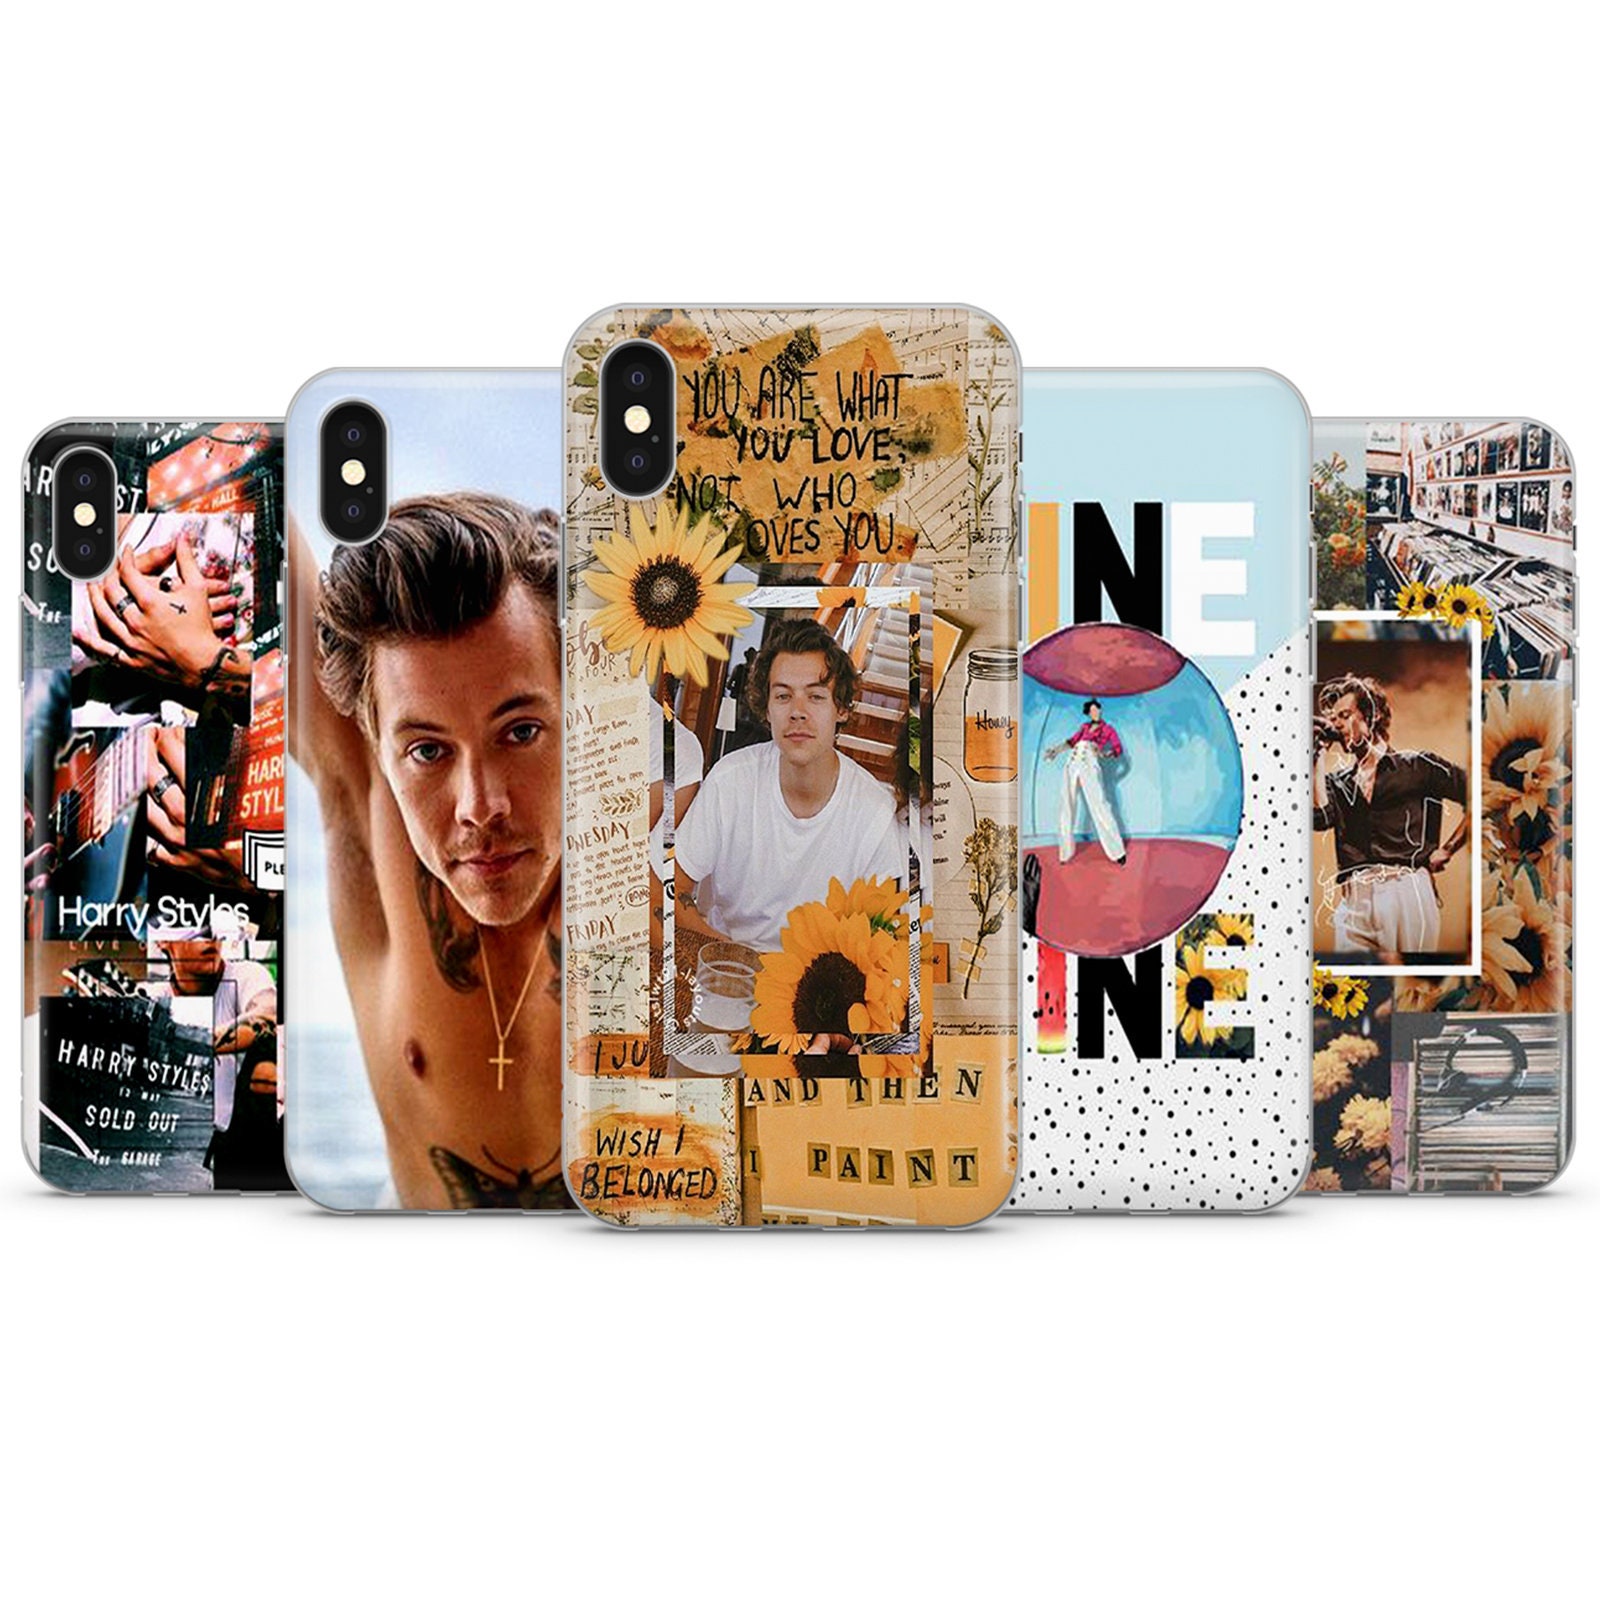 Harry Styles Phone Case Cover, Fits iPhone 7, 8, 11, 12 PRO, XR, XS,  Samsung A30, S20, A12 Huawei P10, P20, P30, P40, P9, Xiaomi Silicone 